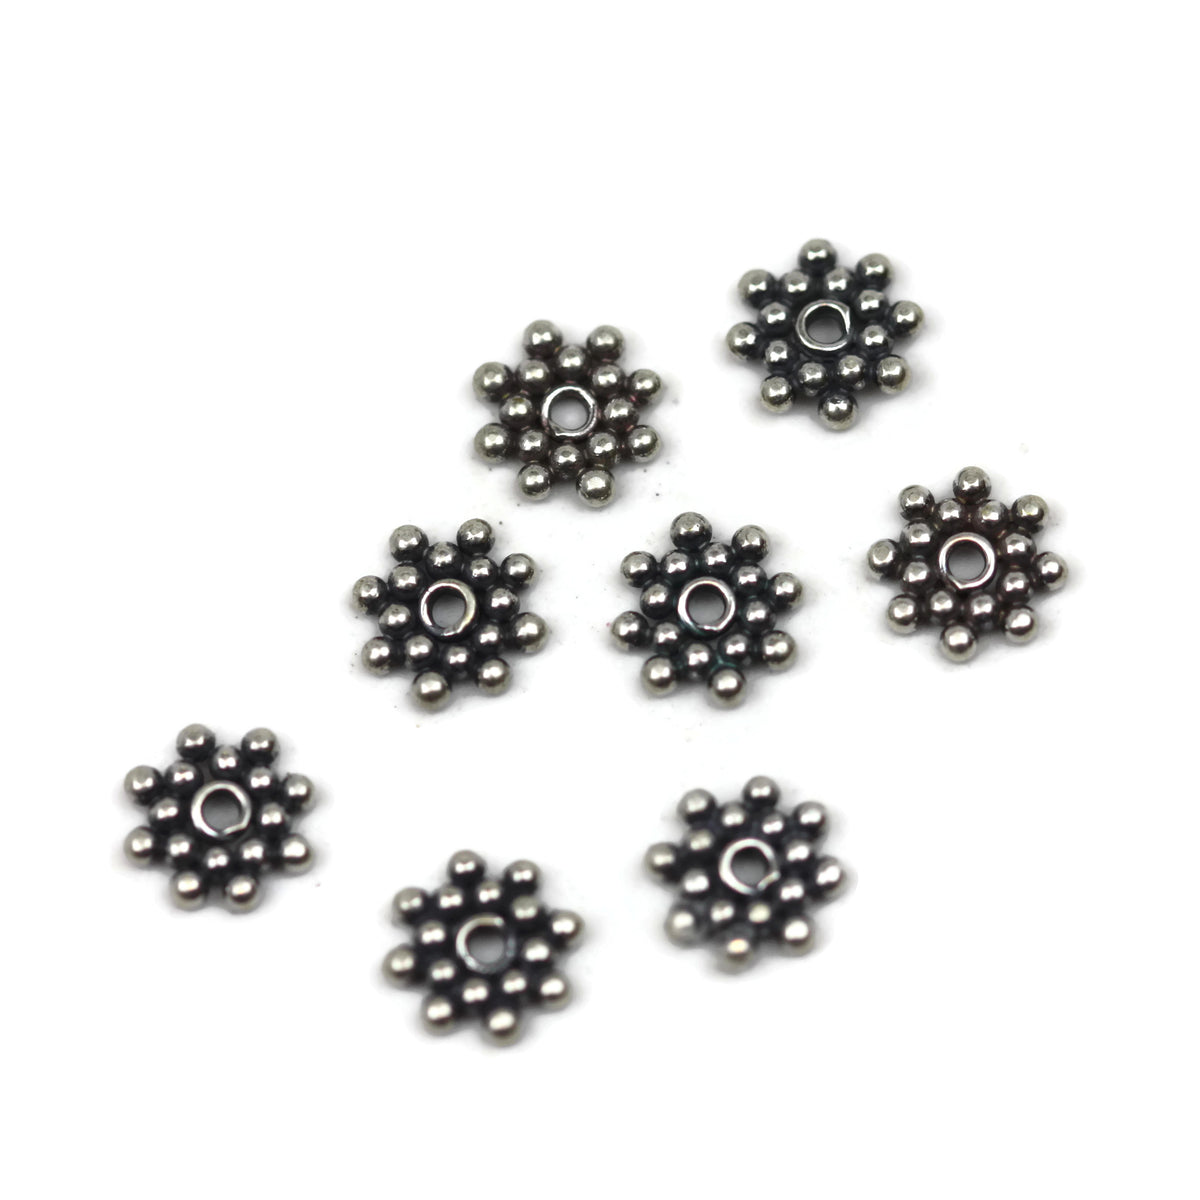 Bali Bead Sterling Silver Flower Daisy Spacer Bead 1.5 x 7mm